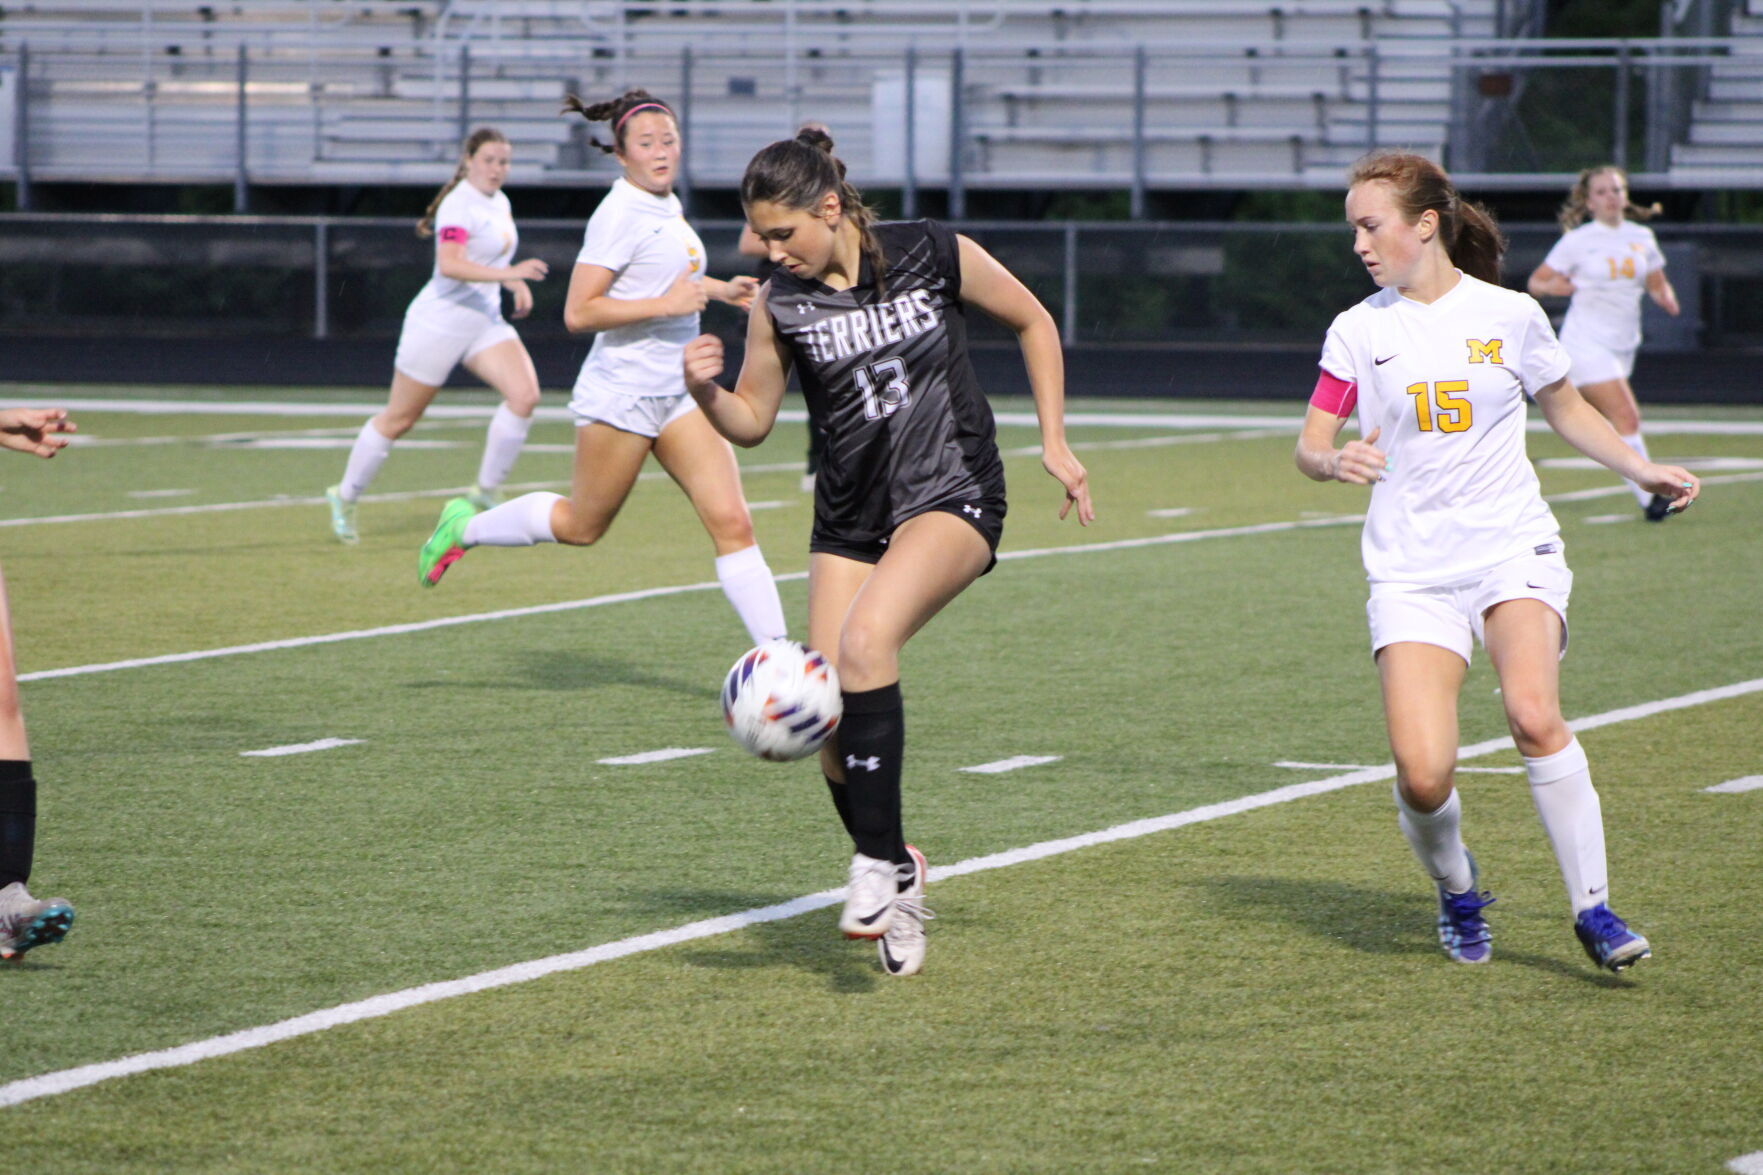 Carbondale girls soccer win dogfight over Marion